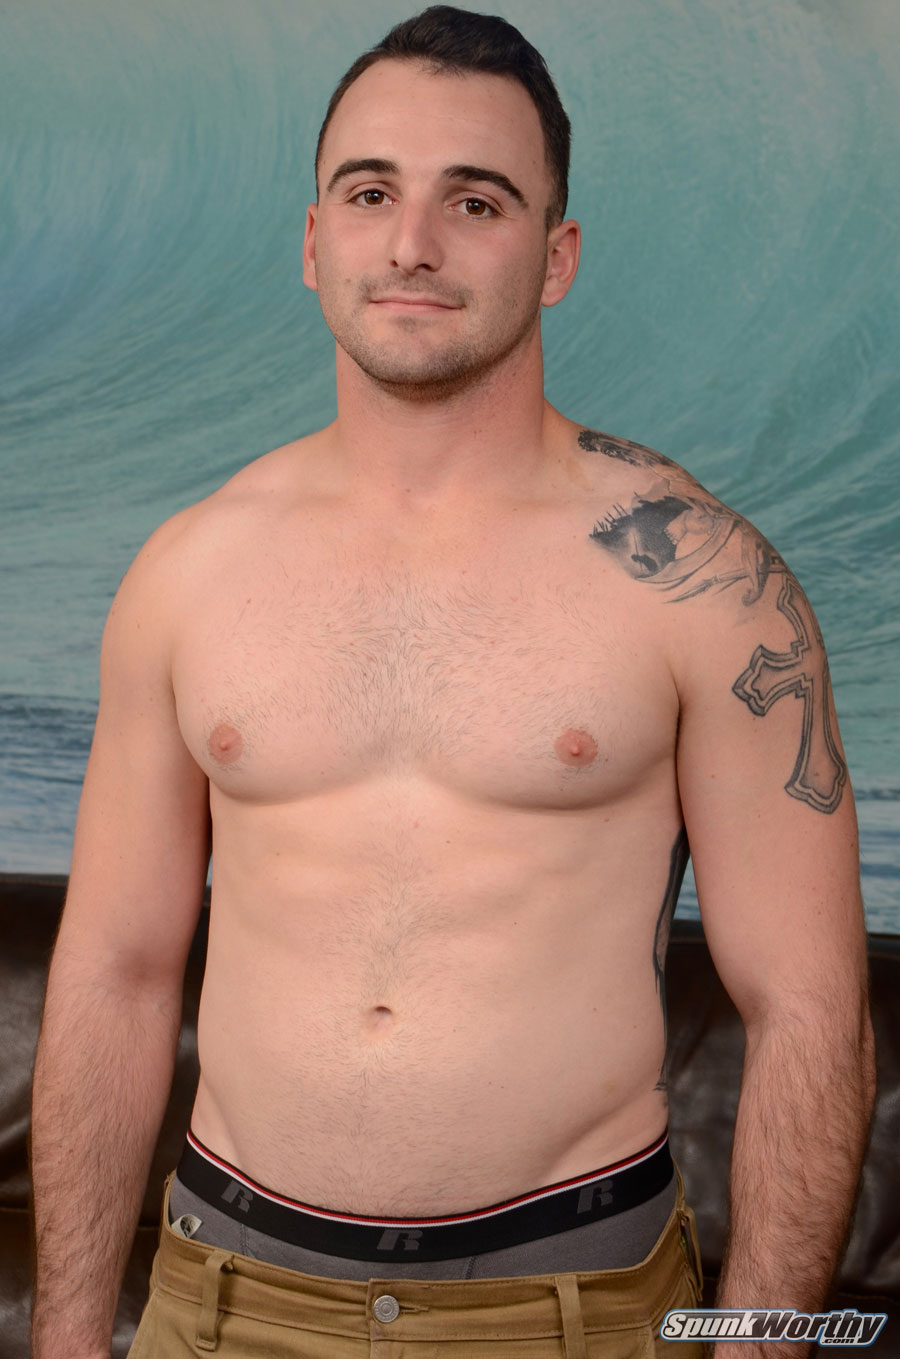 Straight Marine Tom shows off his thick cock and hairy ass on gay porn site Spunk Worthy.